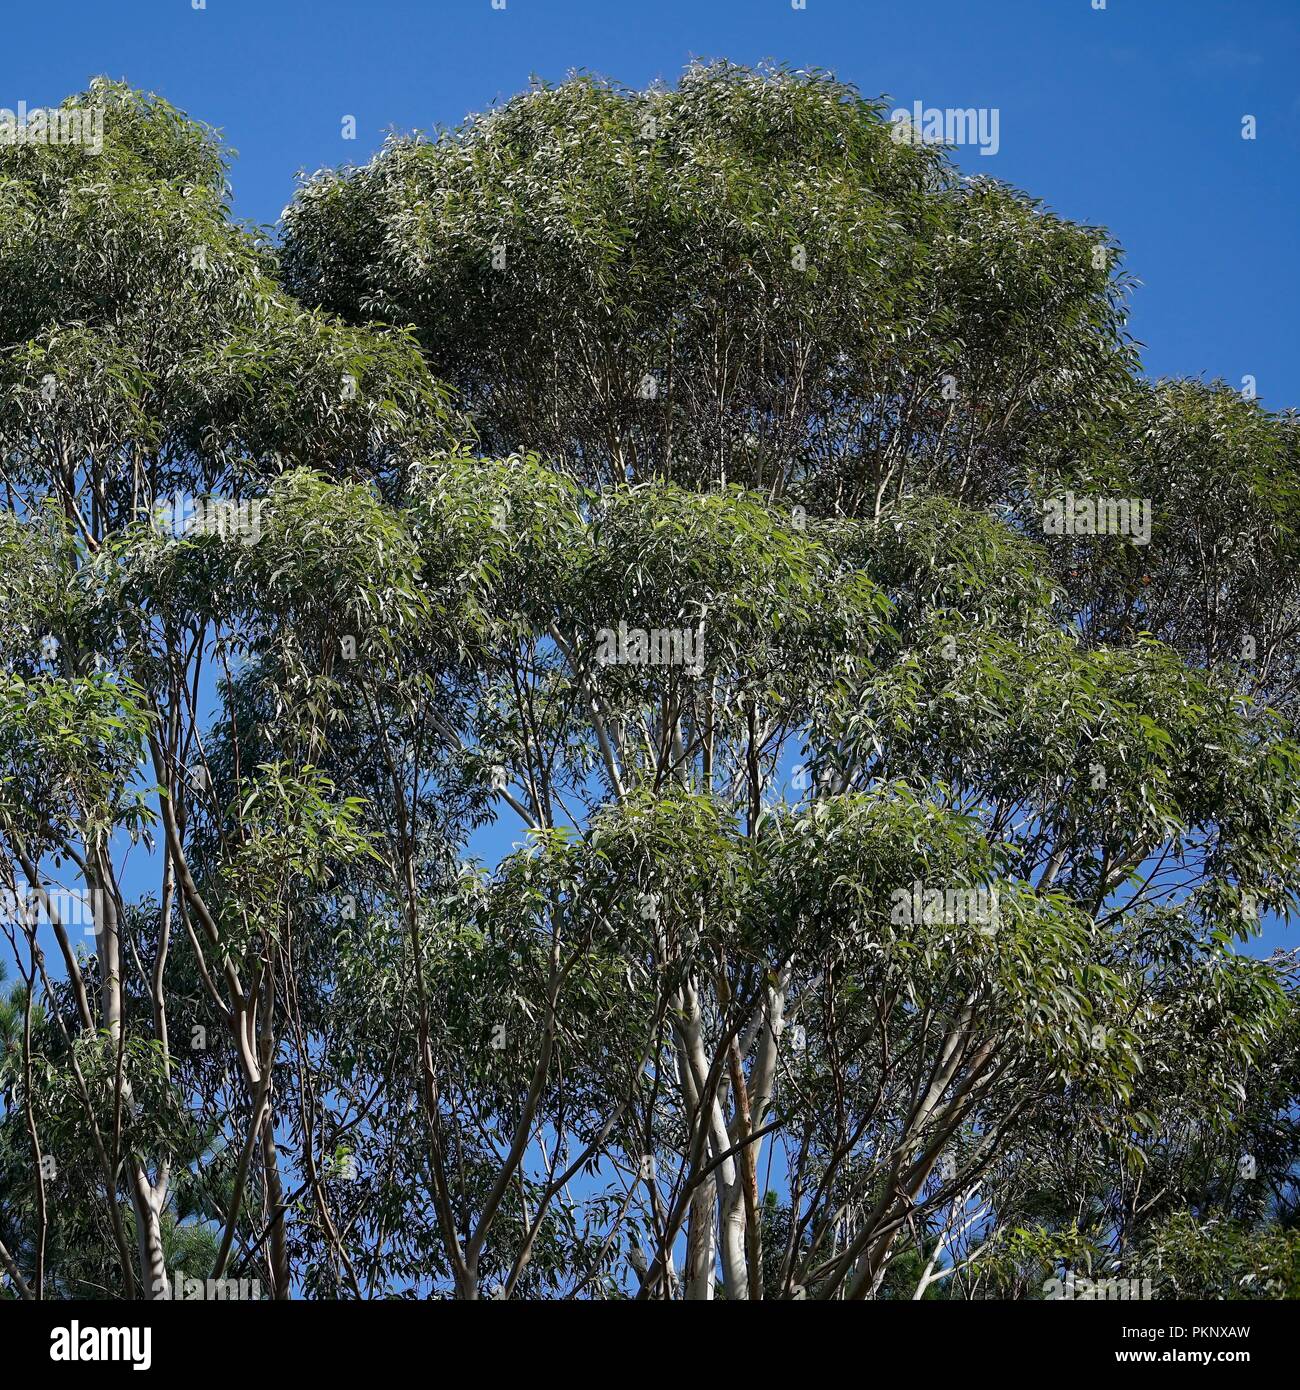 Eucalypt trees, an Australian native plant, showing the canopy with clear blue sky above. Stock Photo